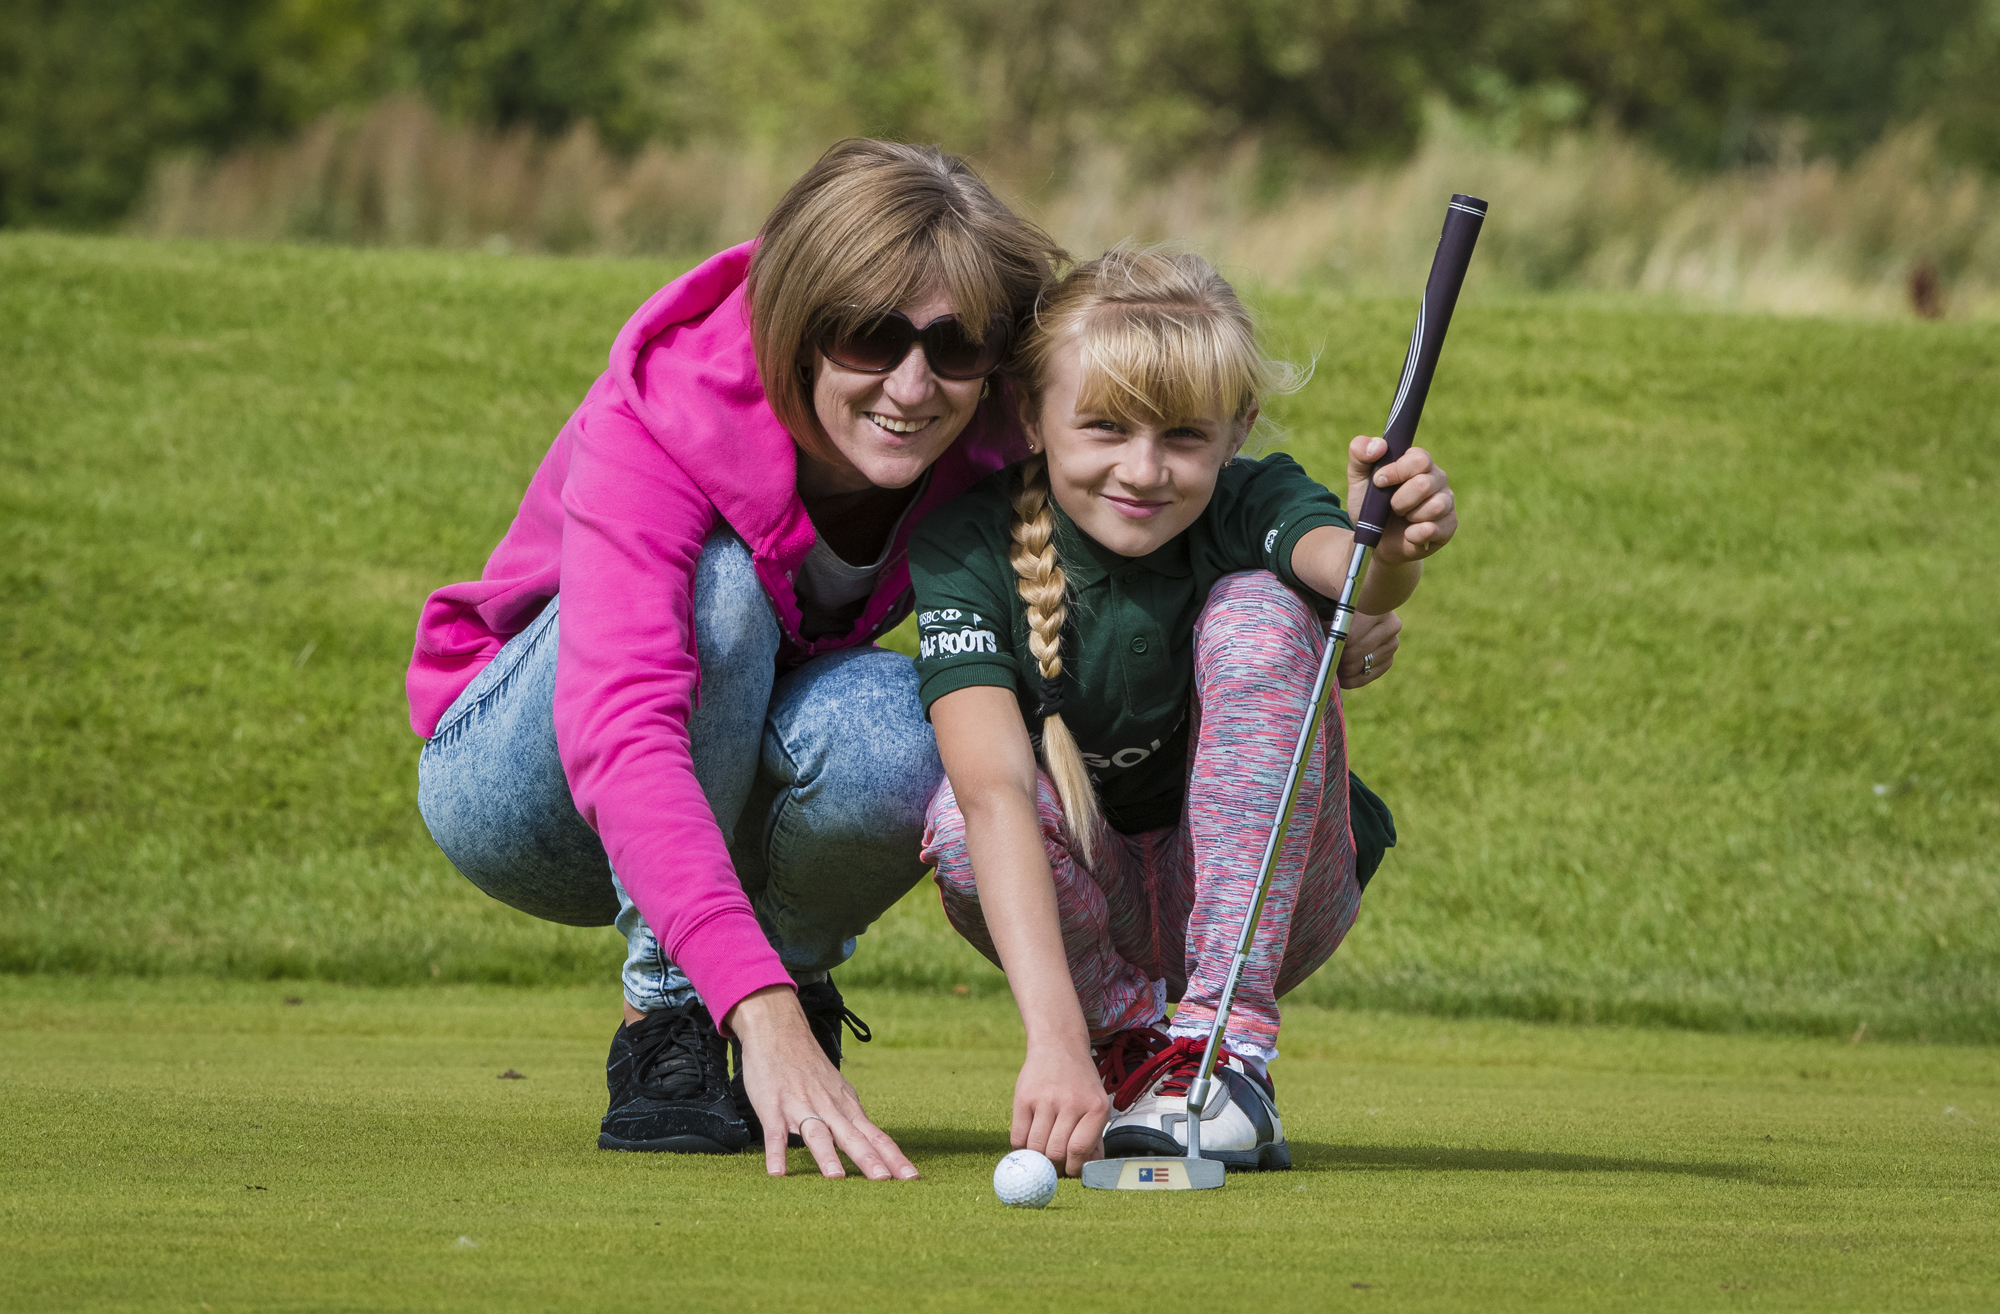 GFMum & Daughter at GolfSixes event CREDIT LEADERBOARD